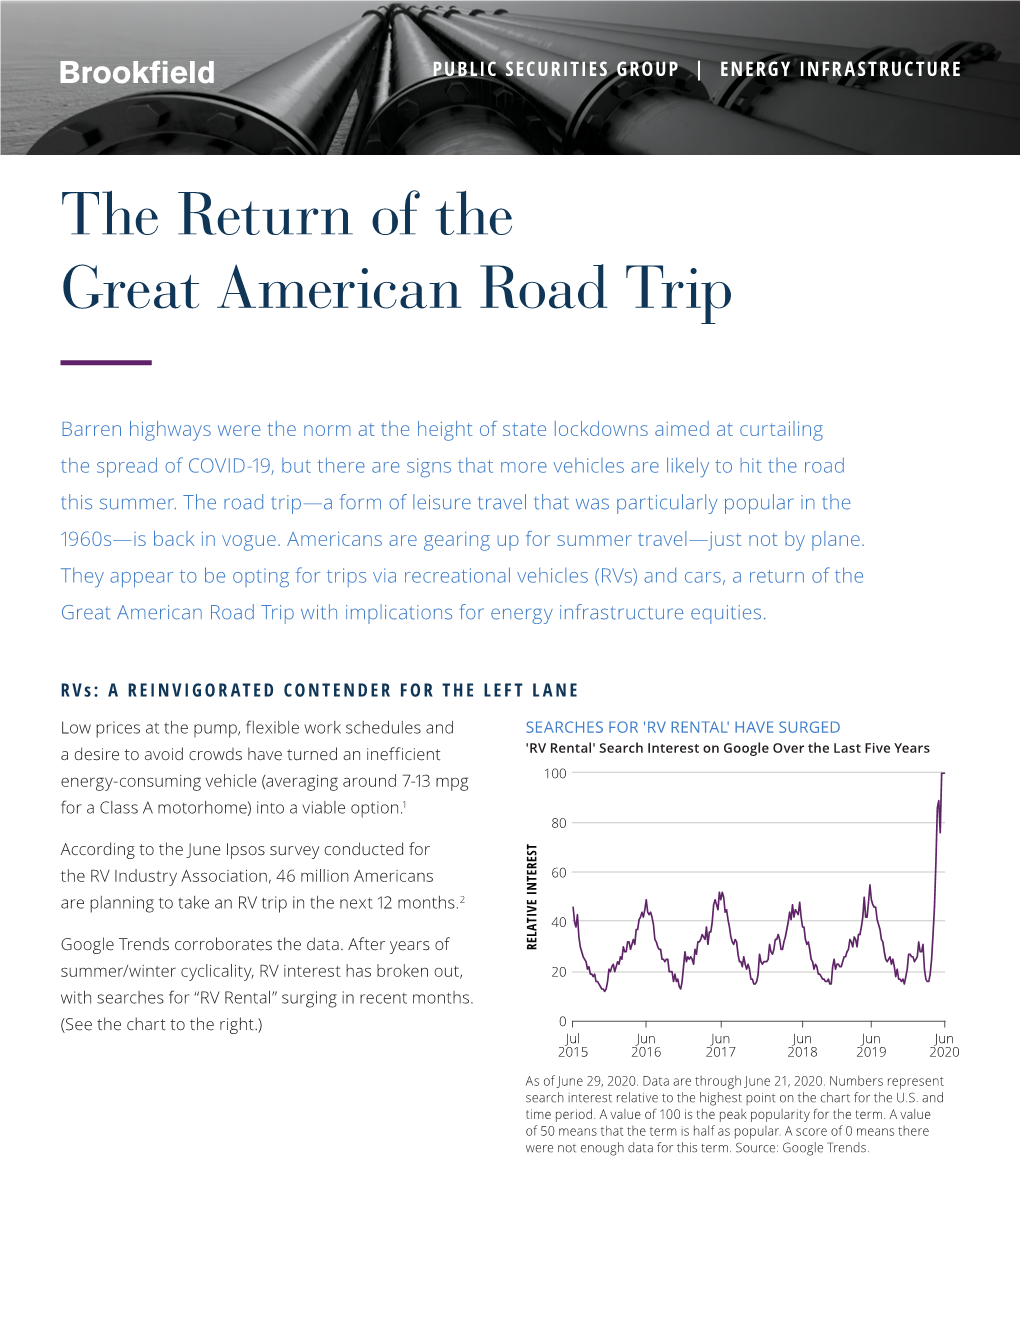 The Return of the Great American Road Trip